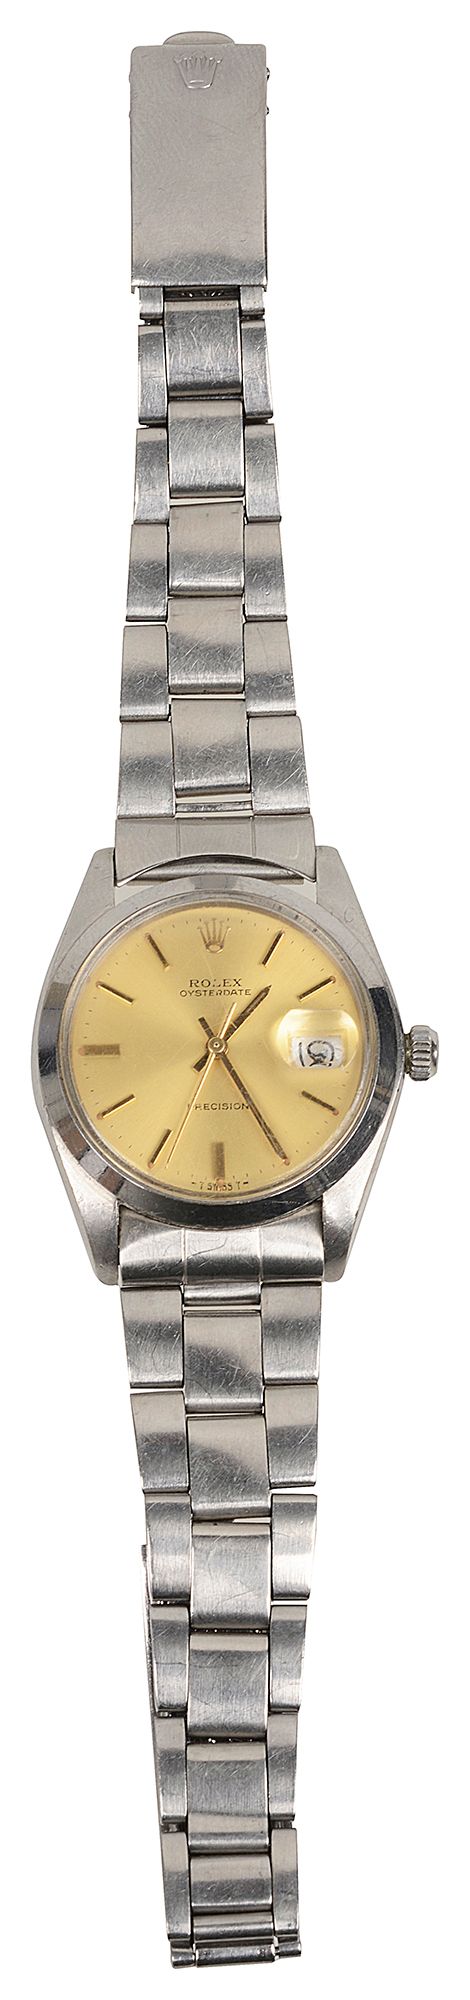 A 1970s Rolex Oysterdate Precision stainless steel watch